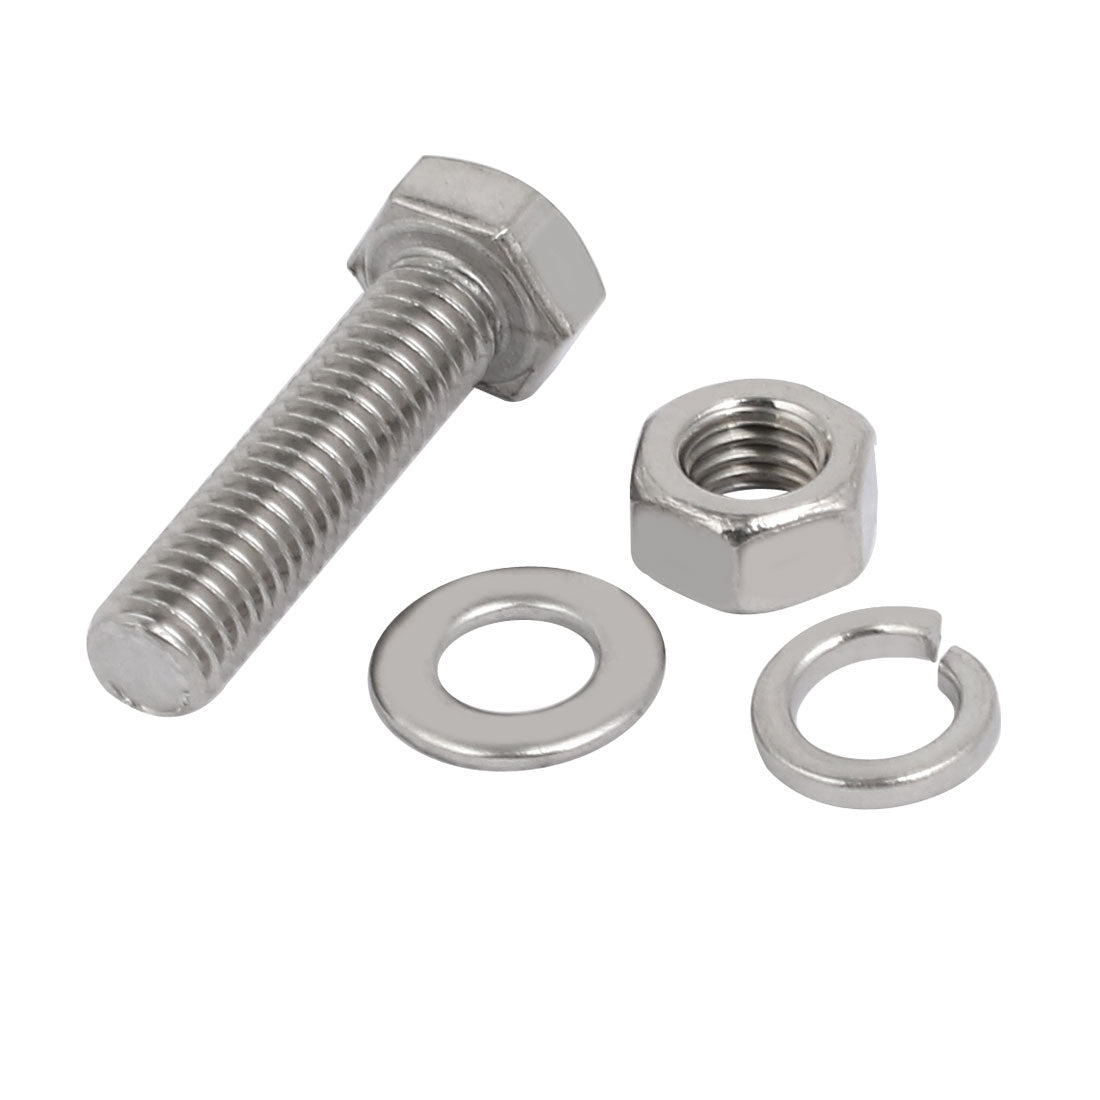 uxcell Uxcell 20pcs 304 Stainless Steel M5x20mm Hex Bolts w Nuts and Washers Assortment Kit